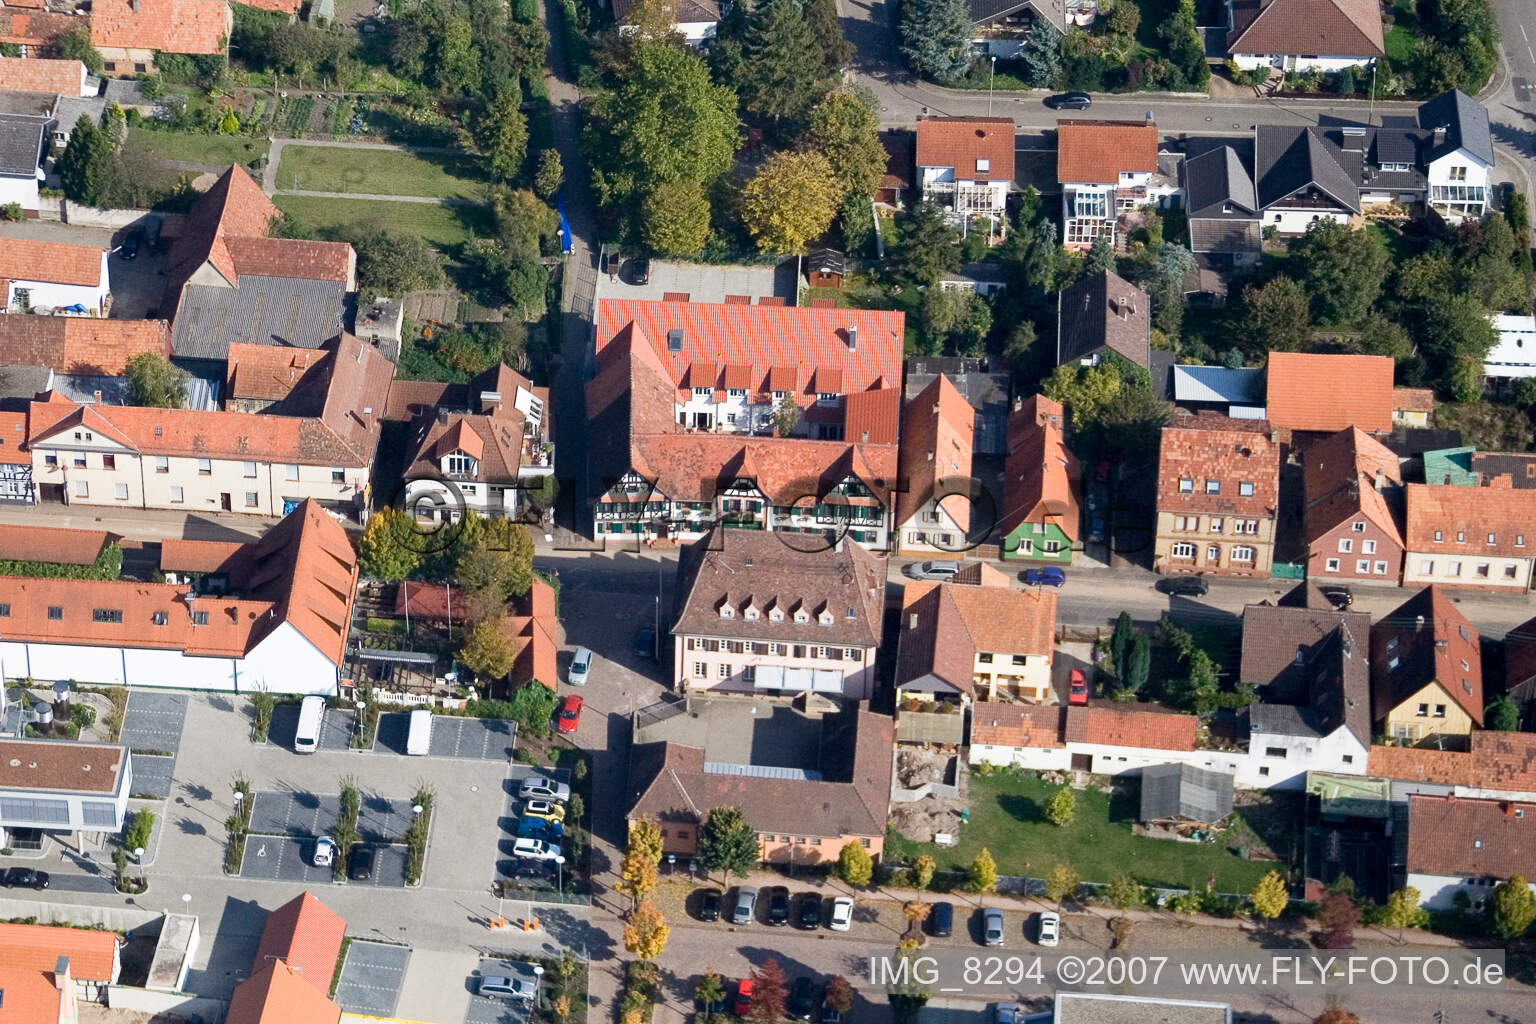 Aerial view of Bahnhofstr in Kandel in the state Rhineland-Palatinate, Germany